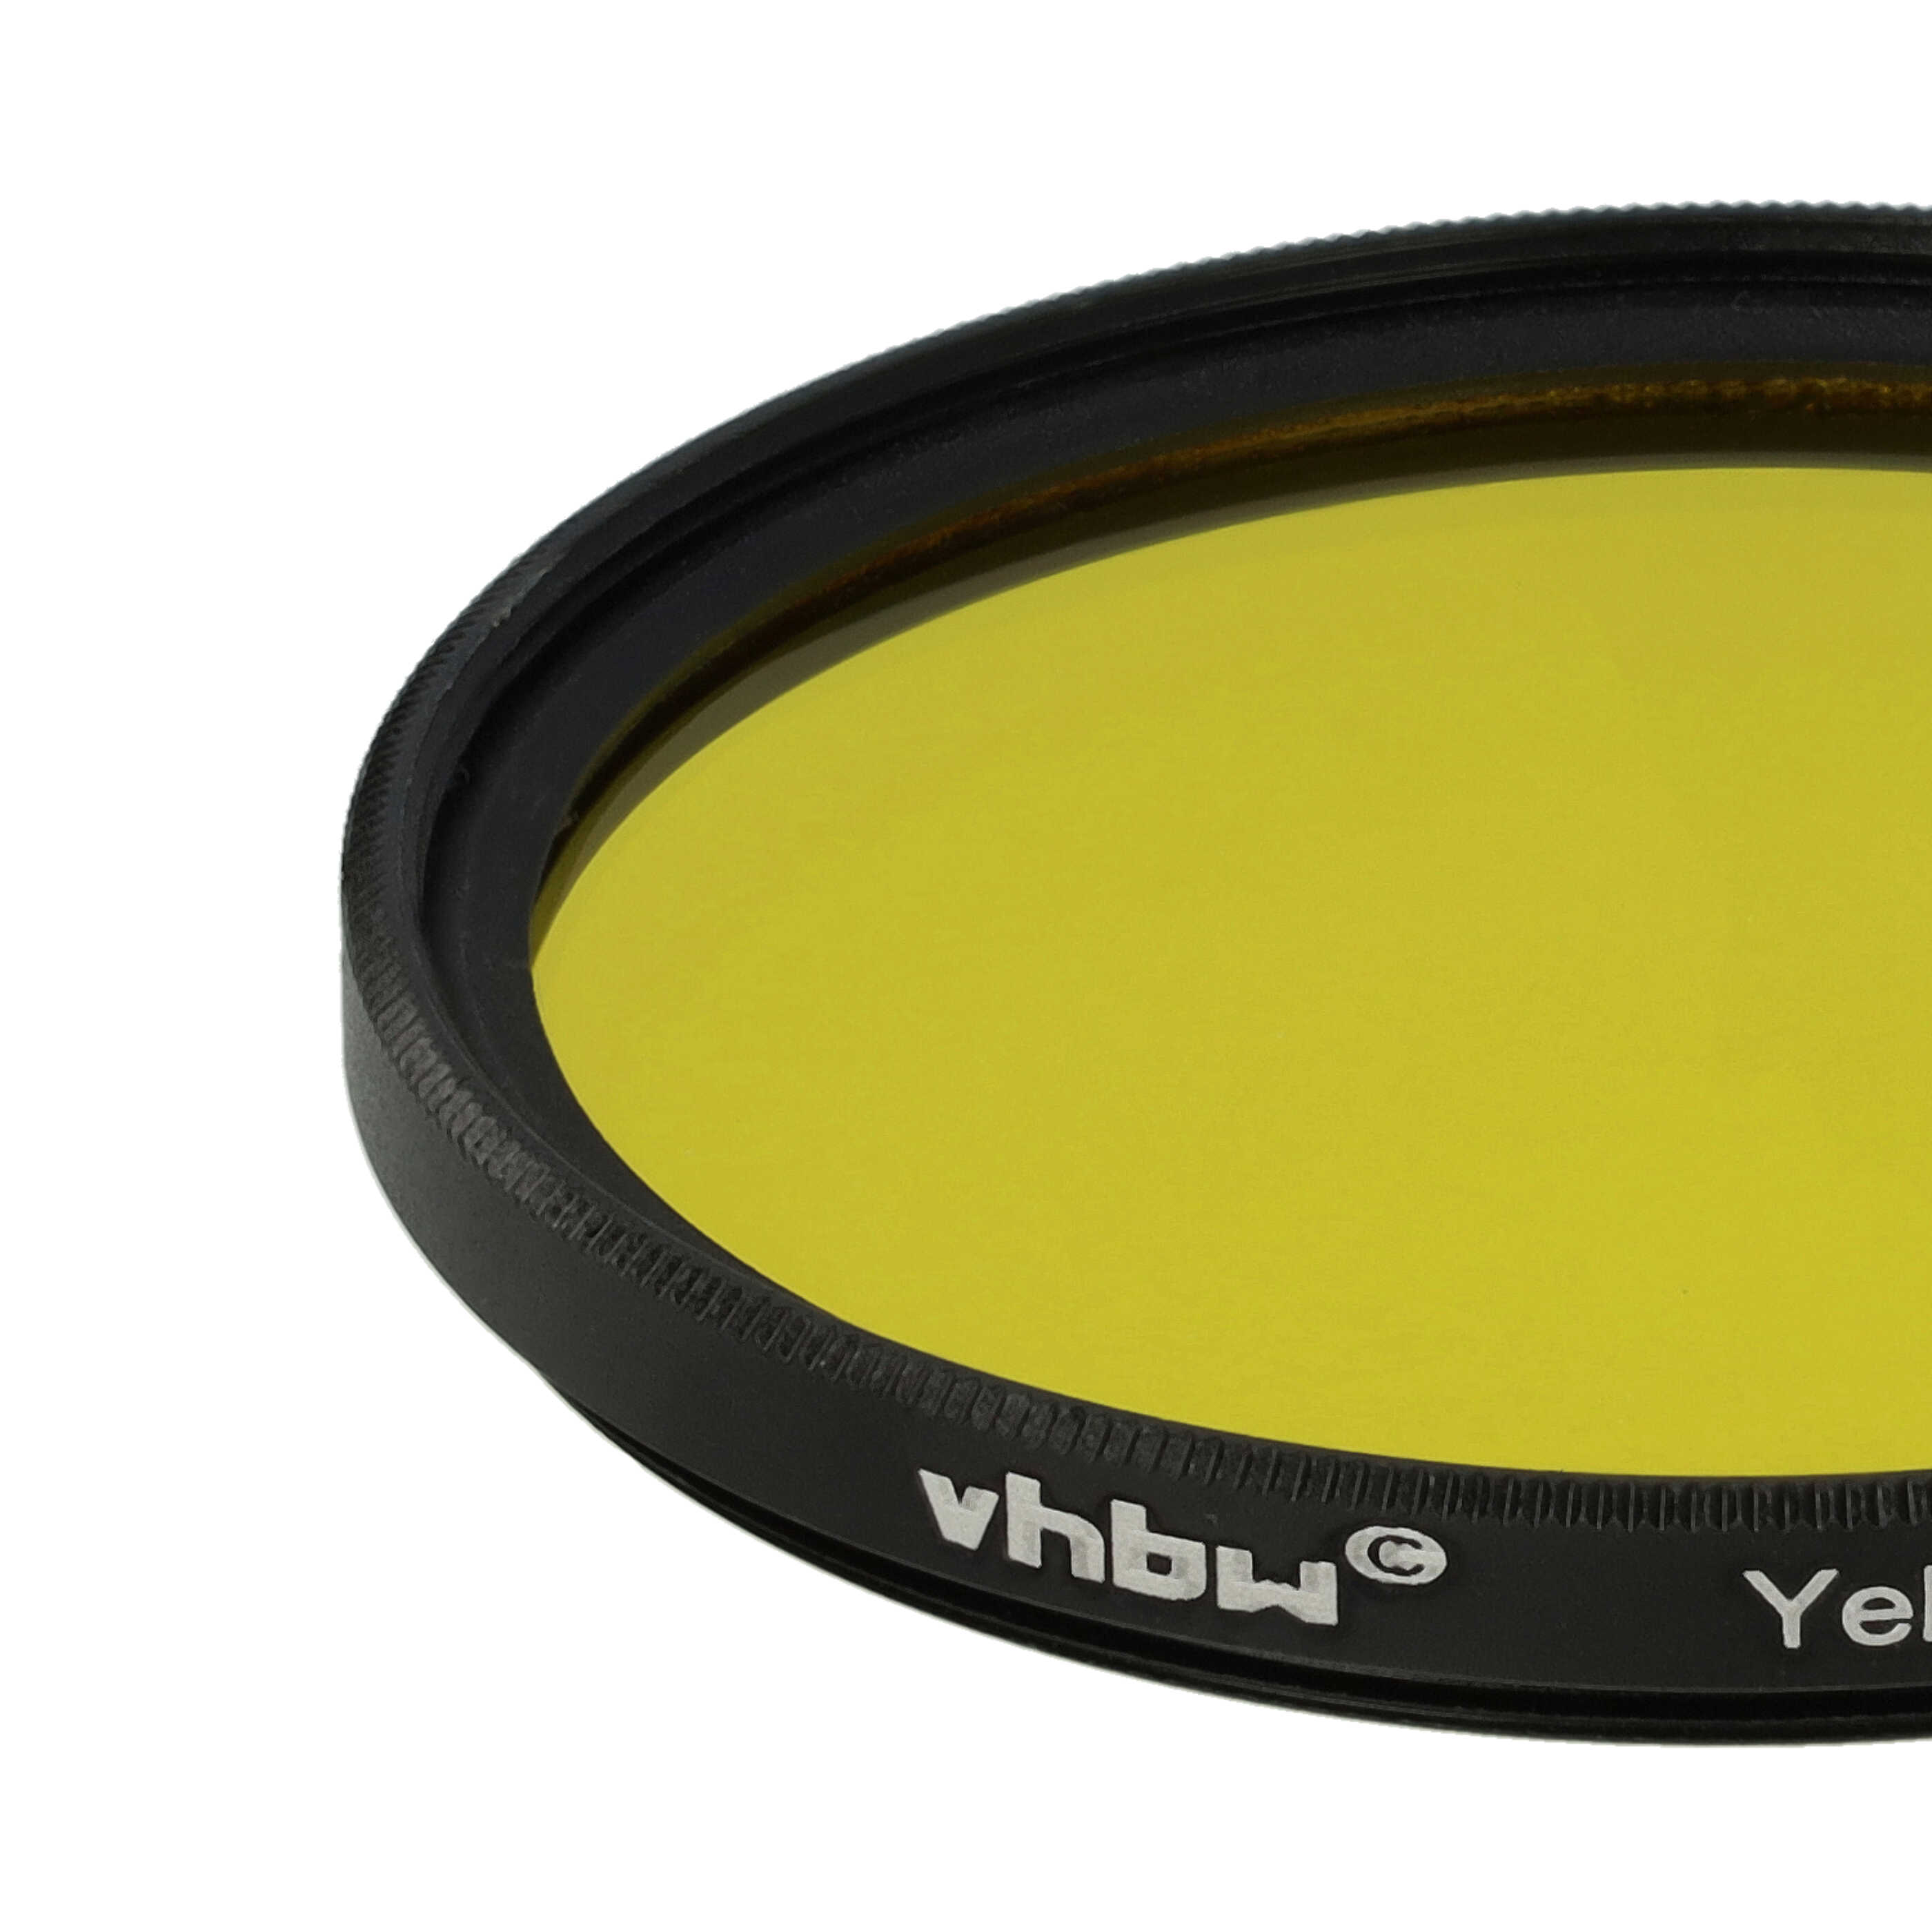 Coloured Filter, Yellow suitable for Camera Lenses with 55 mm Filter Thread - Yellow Filter